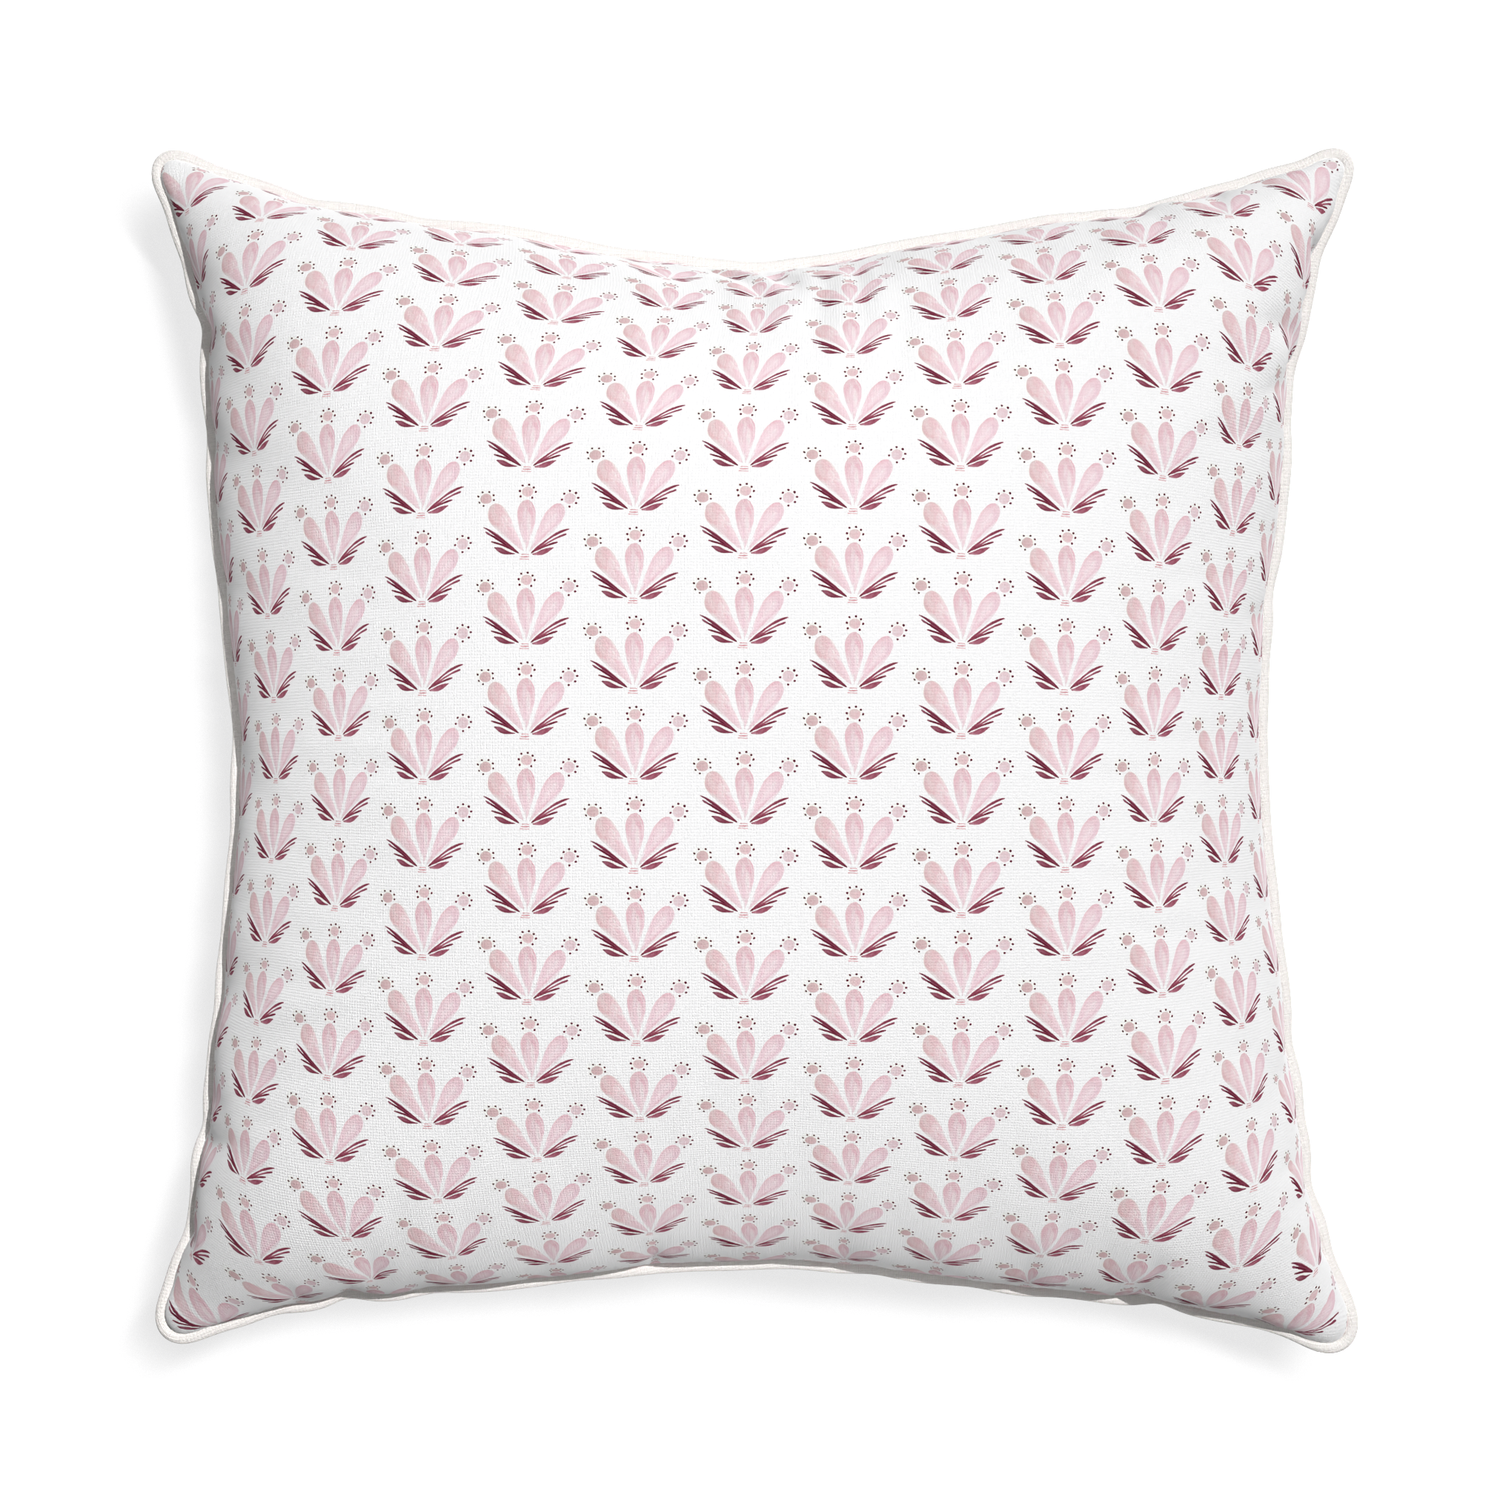 Euro-sham serena pink custom pink & burgundy drop repeat floralpillow with snow piping on white background